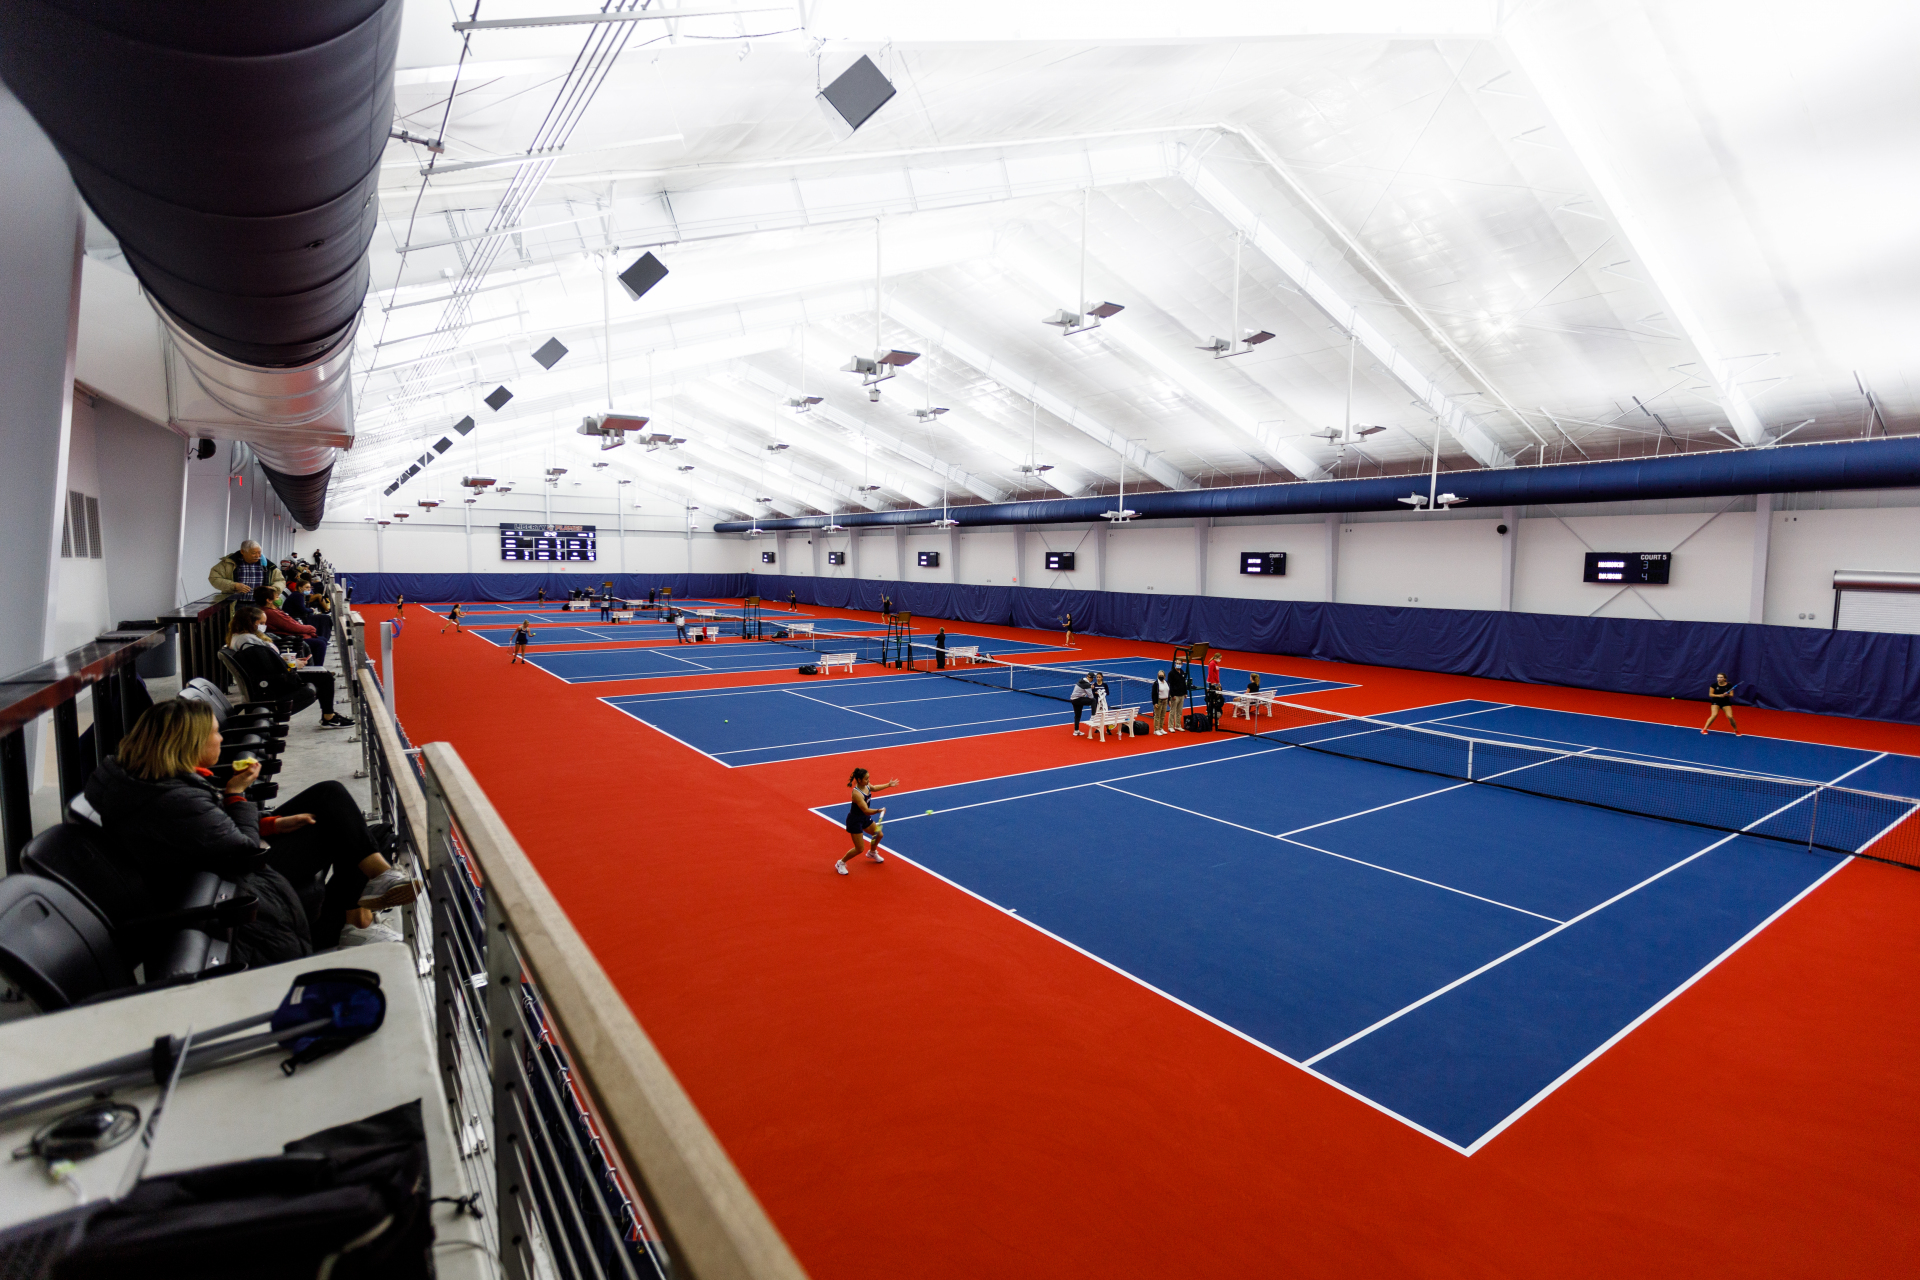 Women’s Tennis takes on Davidson in the Flames new indoor tennis facility on Saturday February, 2021. (Photo by KJ Jugar)